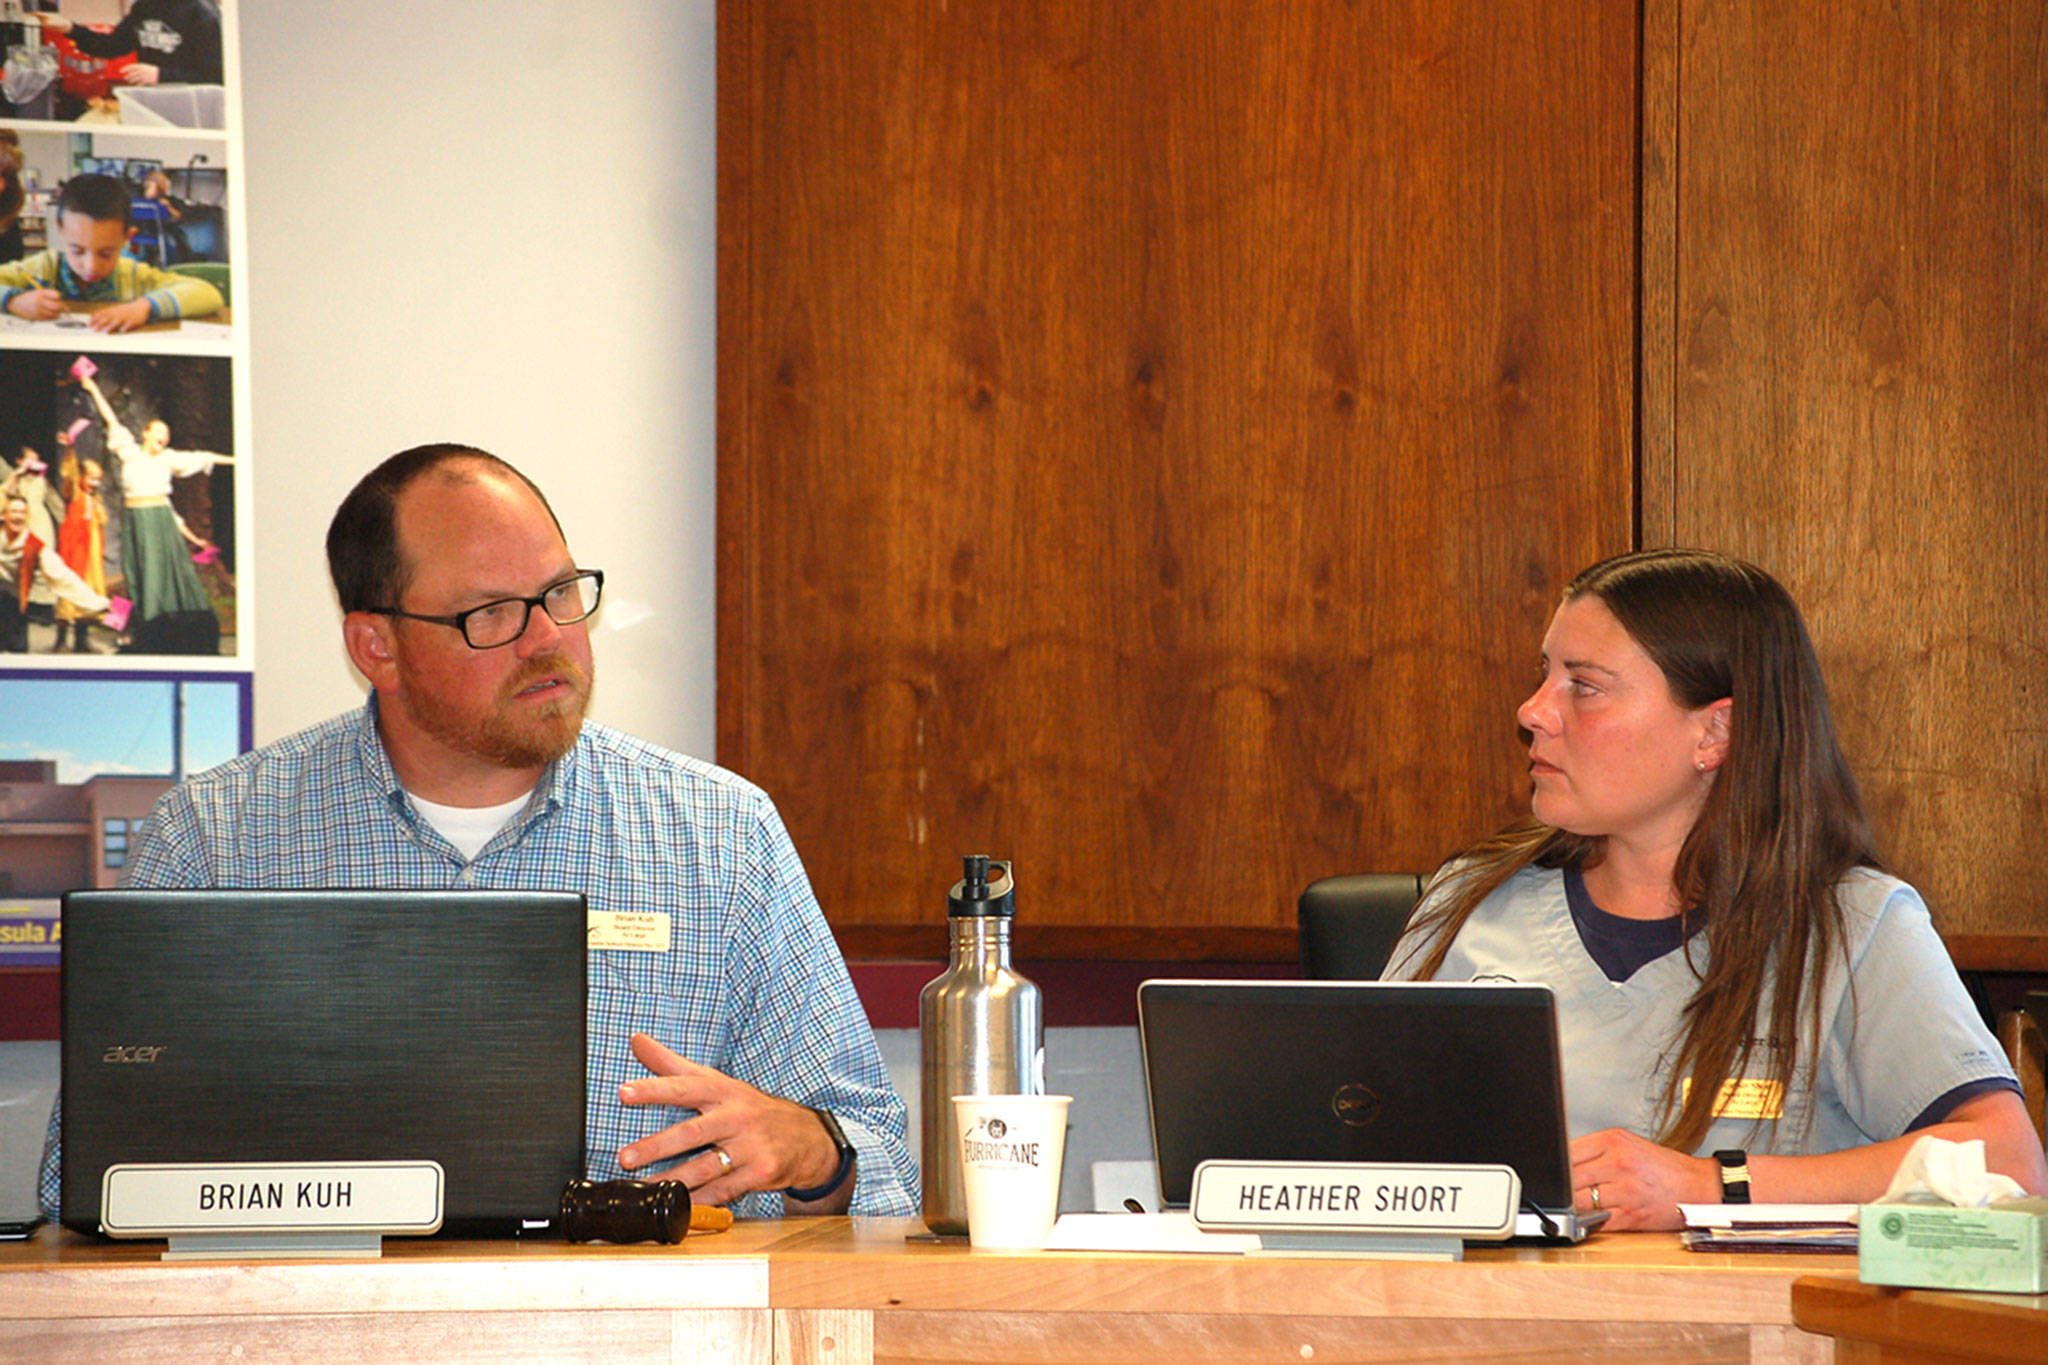 The Sequim School Board approved Brian Kuh, left, as the board’s new president as former president Heather Short, right, announced she was stepping down. Short will now serve as the board’s vice president. (Erin Hawkins/Olympic Peninsula News Group)